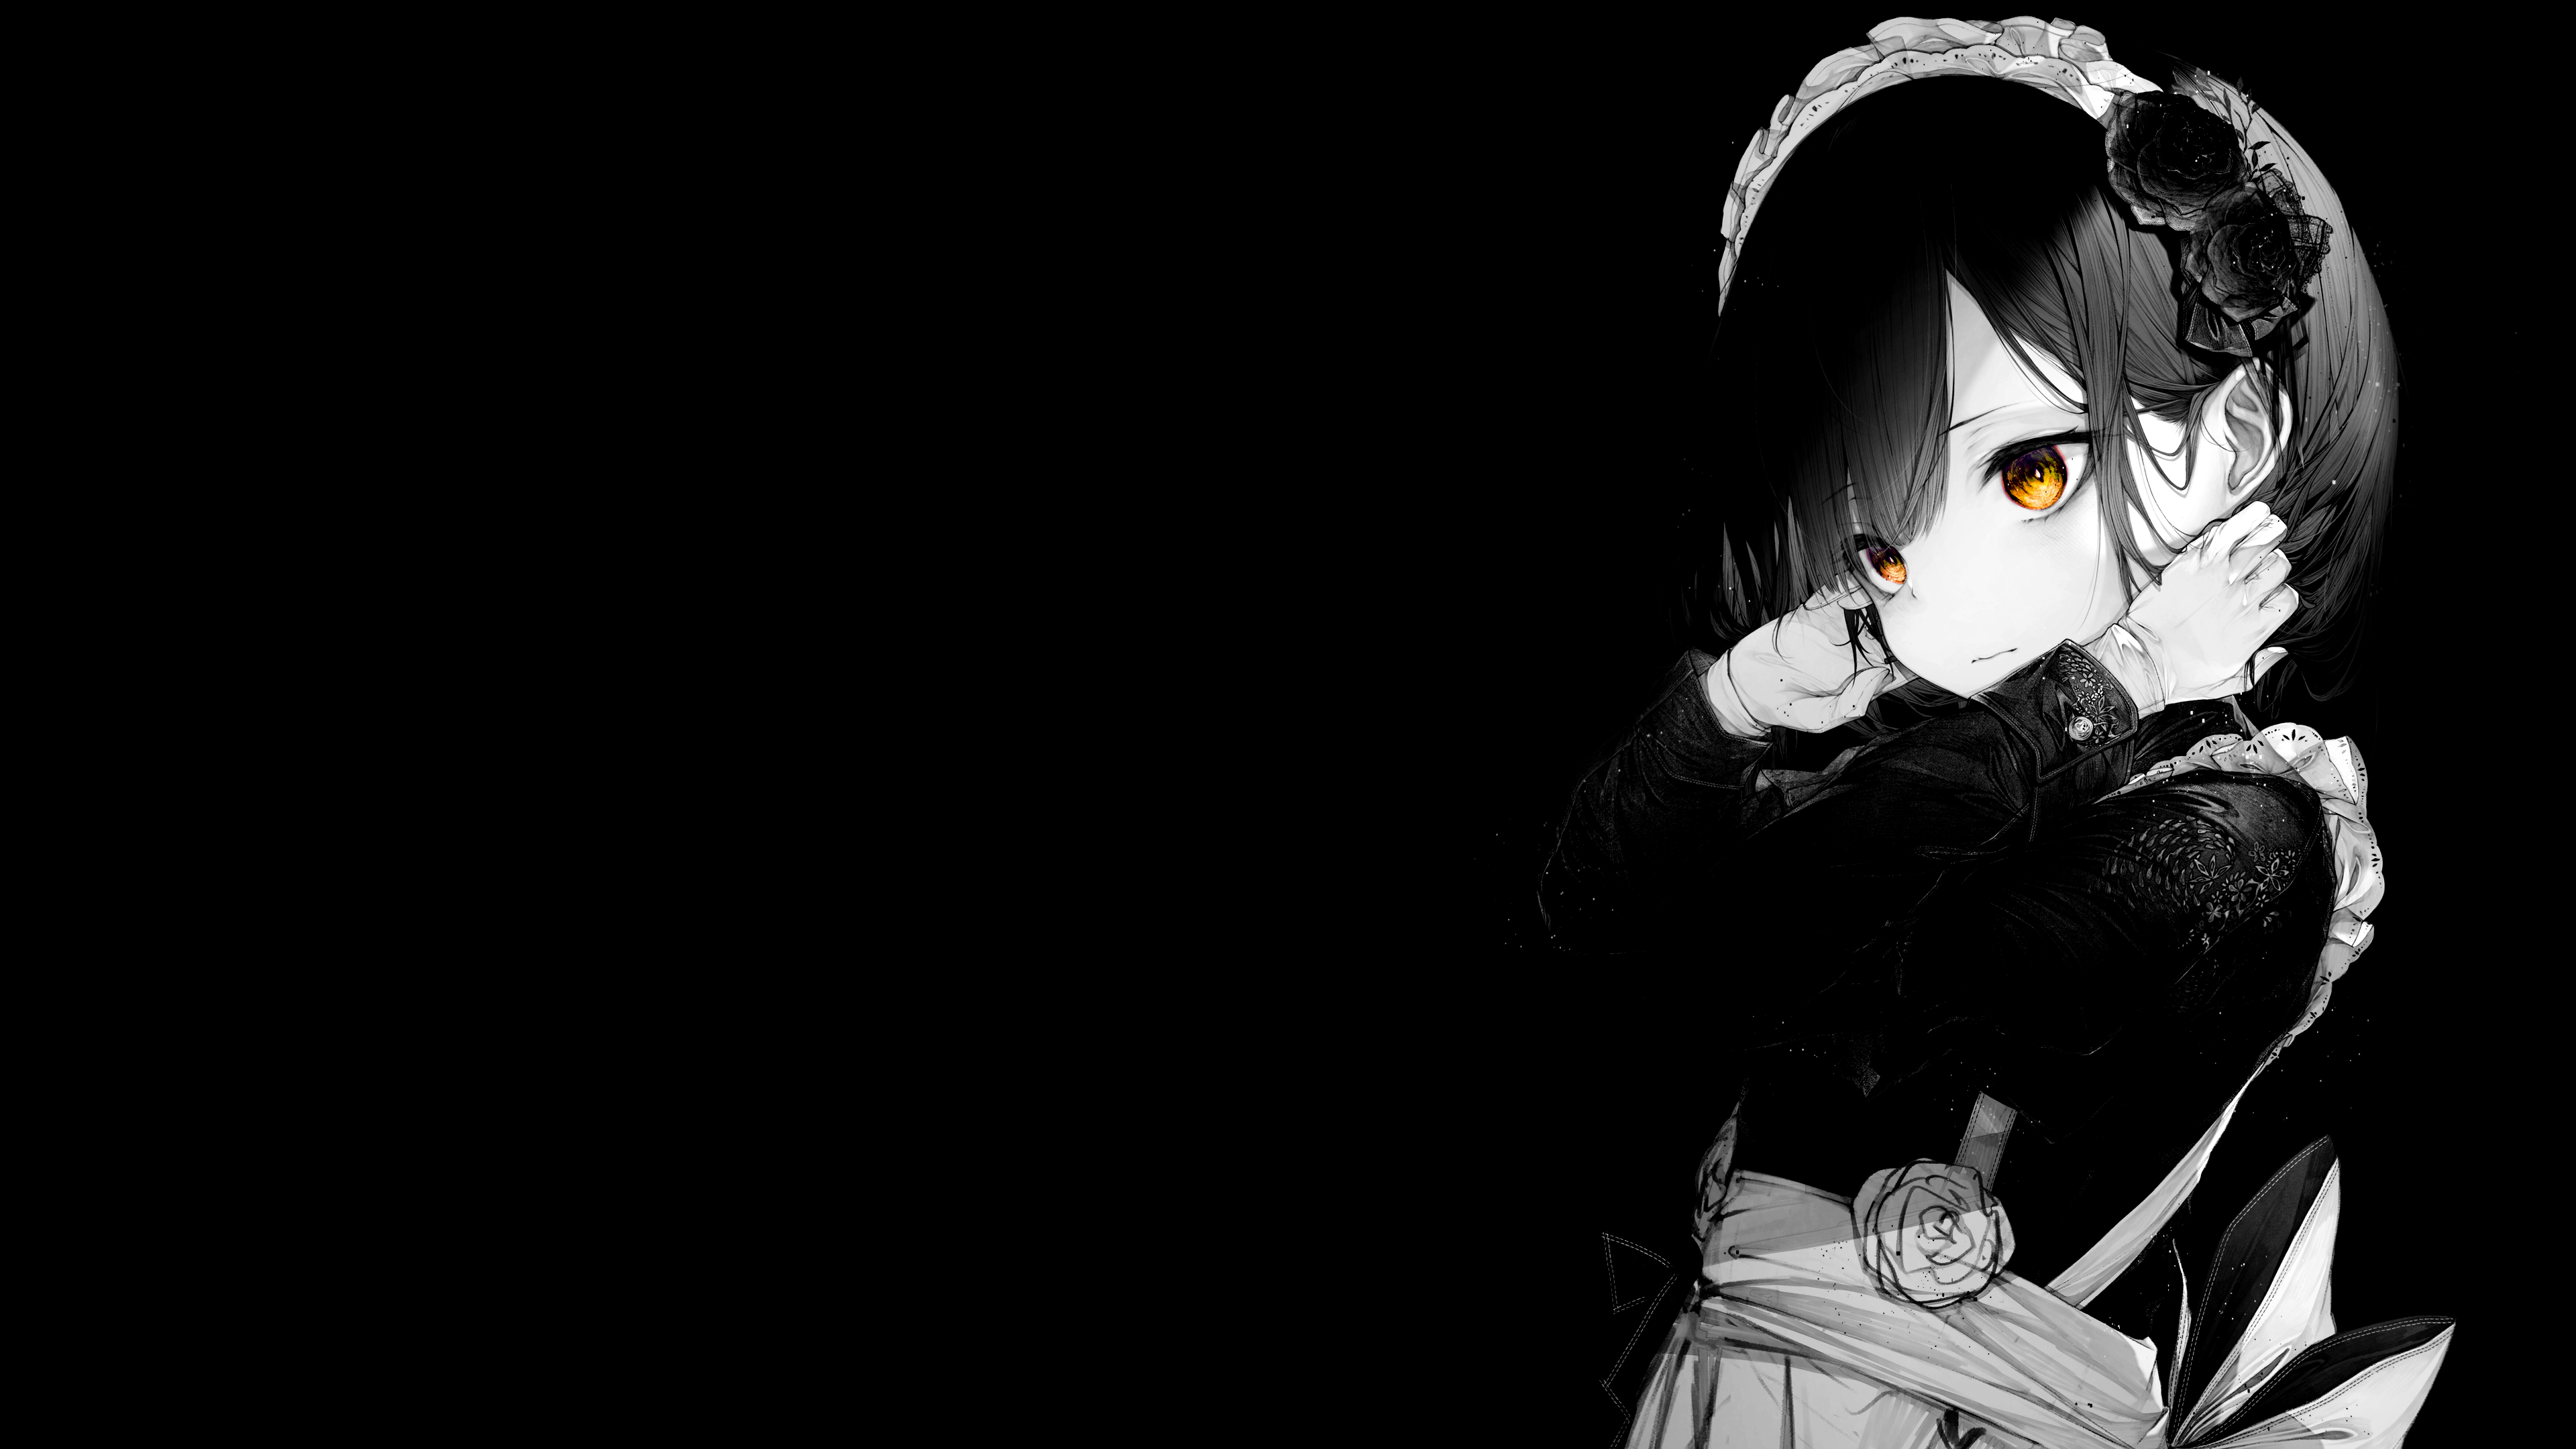 Anime 3840x2160 anime girls selective coloring black background dark background simple background flower in hair maid maid outfit